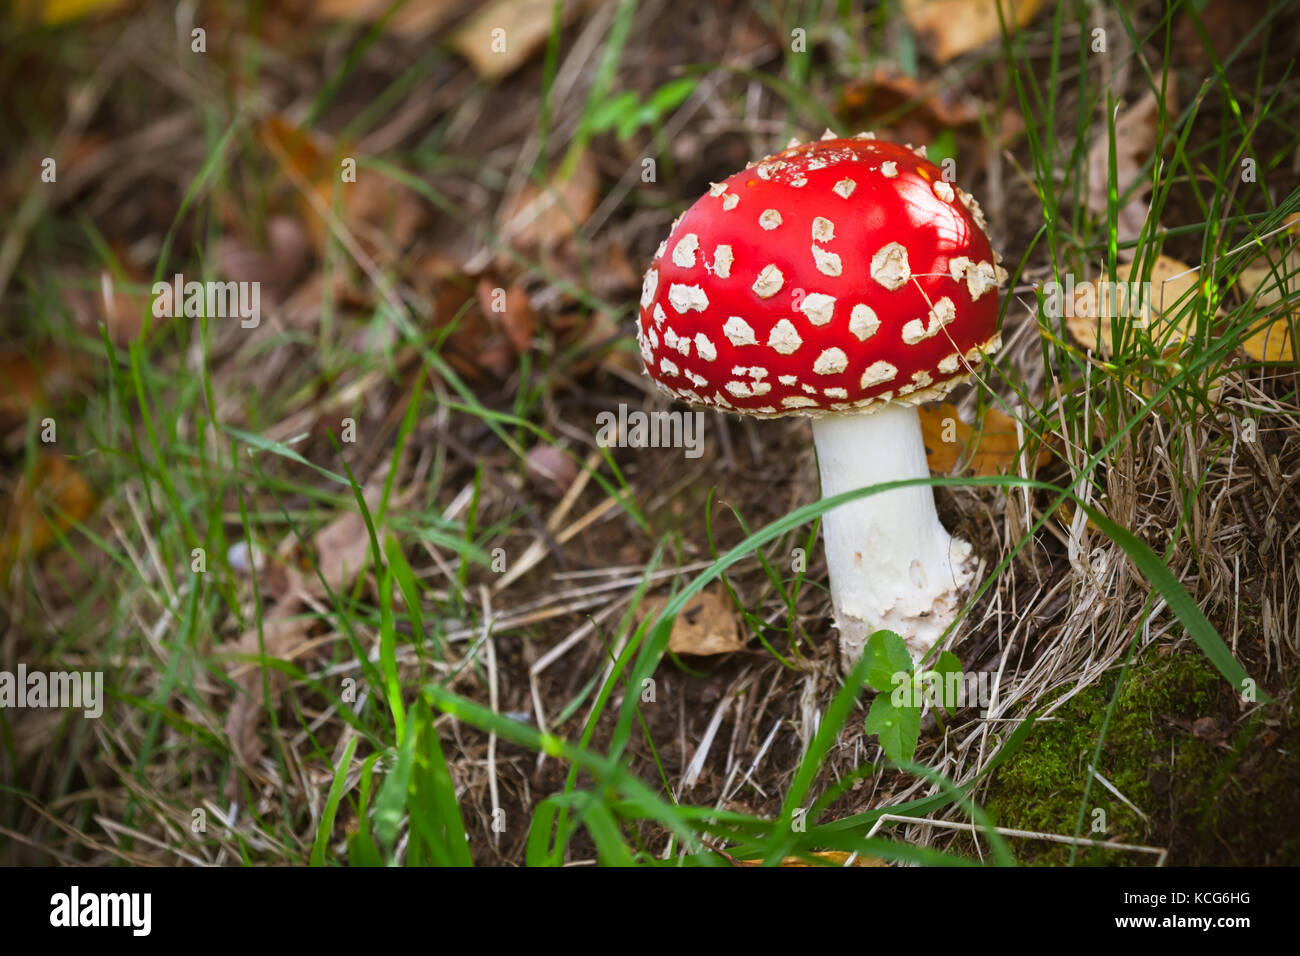 Bright red poisonous mushroom Amanita muscaria, commonly known as the fly agaric or fly amanita grows in summer European forest Stock Photo